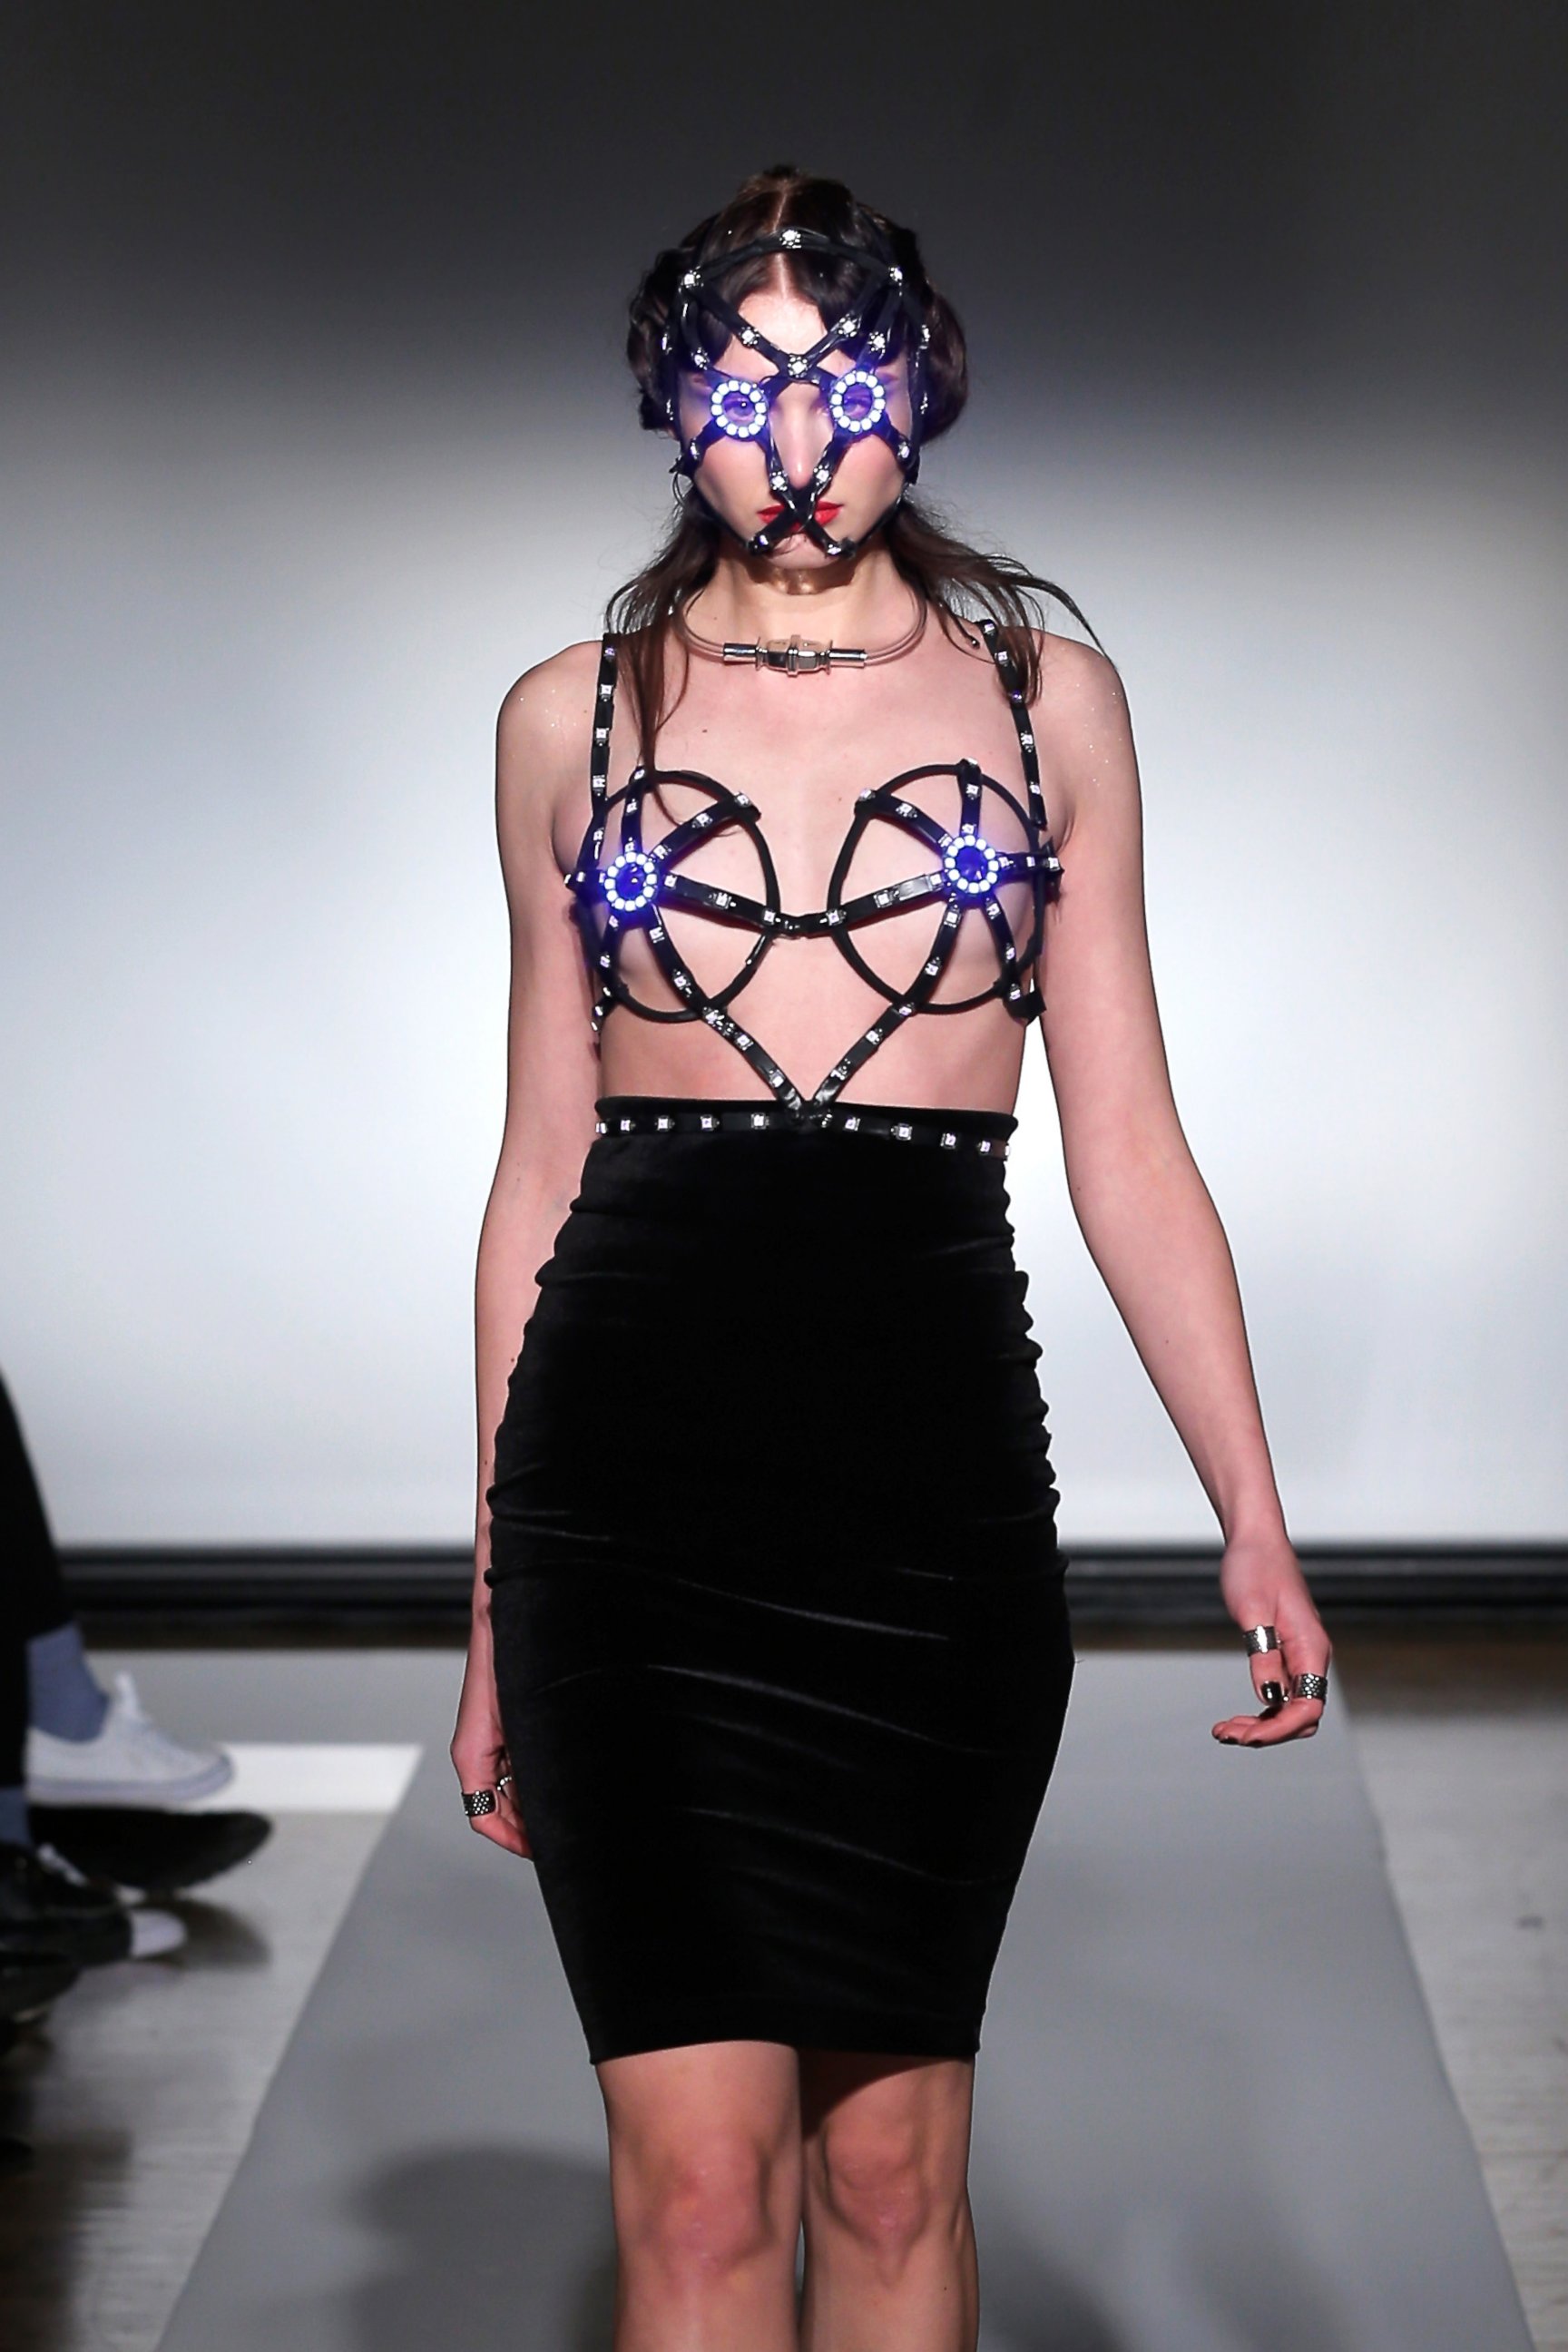 PHOTO: In this file photo, a model walks the runway at the Chromat AW14 Runway show during MADE Fashion Week Fall 2014 at The Standard Hotel on Feb. 6, 2014 in New York City. 